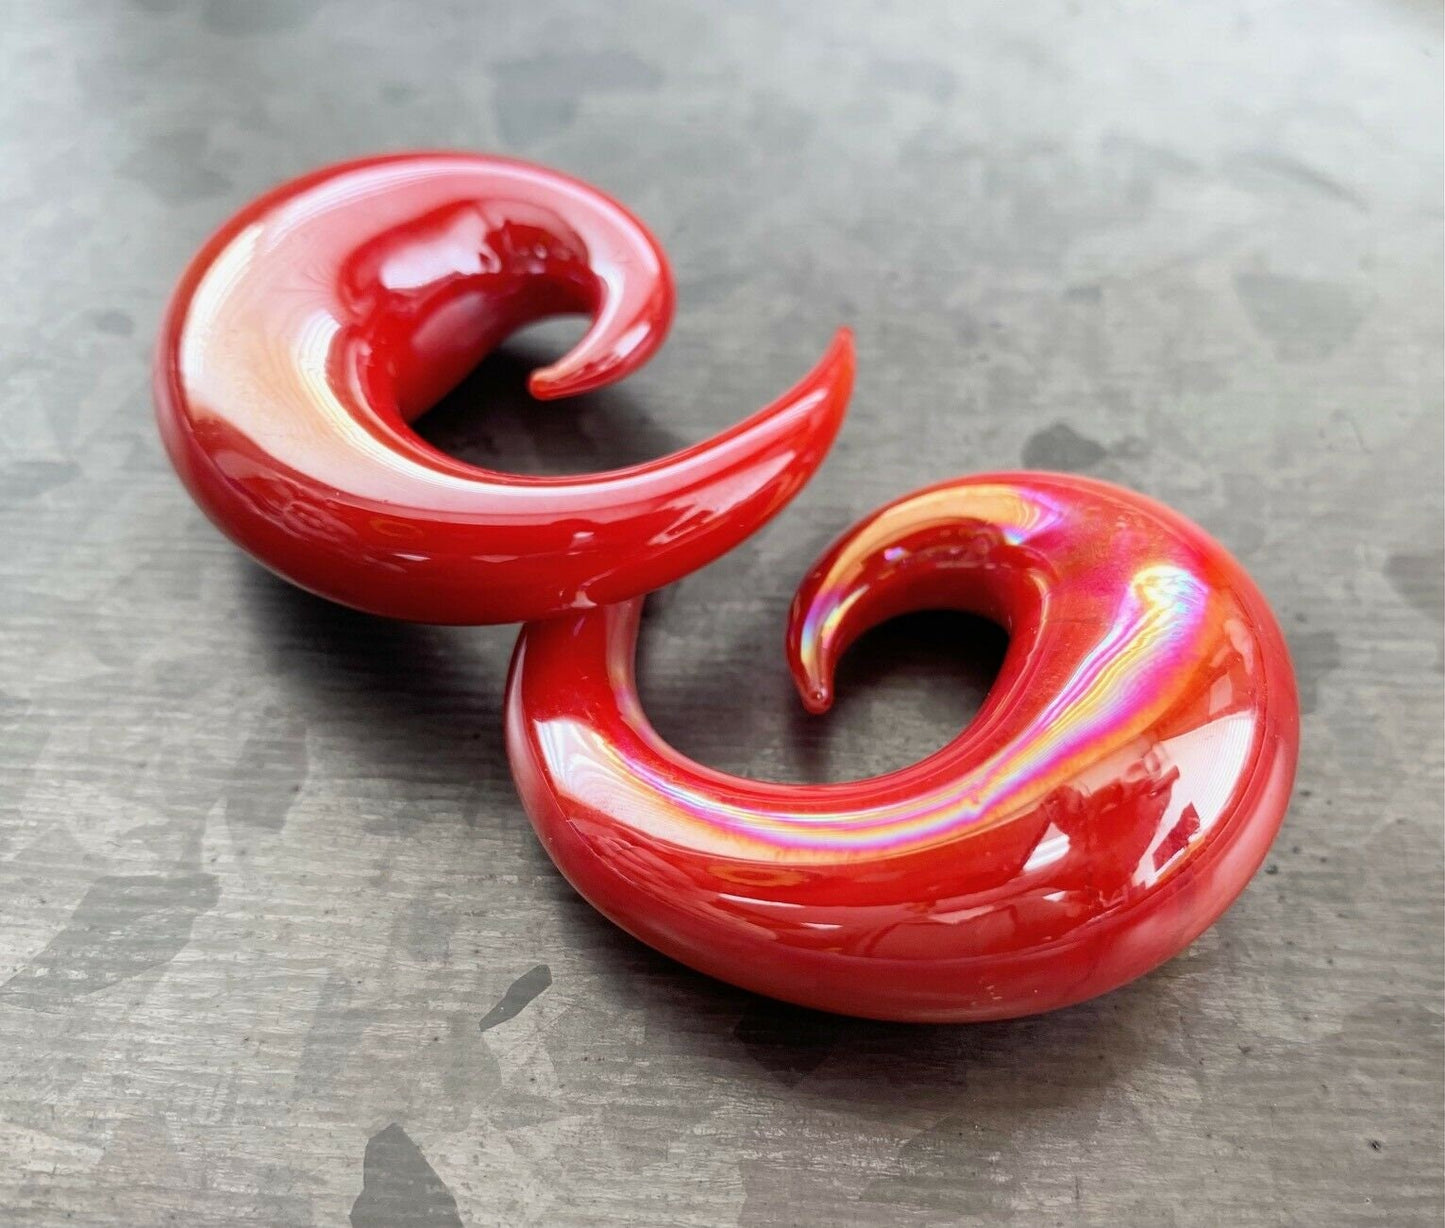 PAIR of Stunning Red Lucifer Glass Spiral Taper Plugs - Expanders Gauges